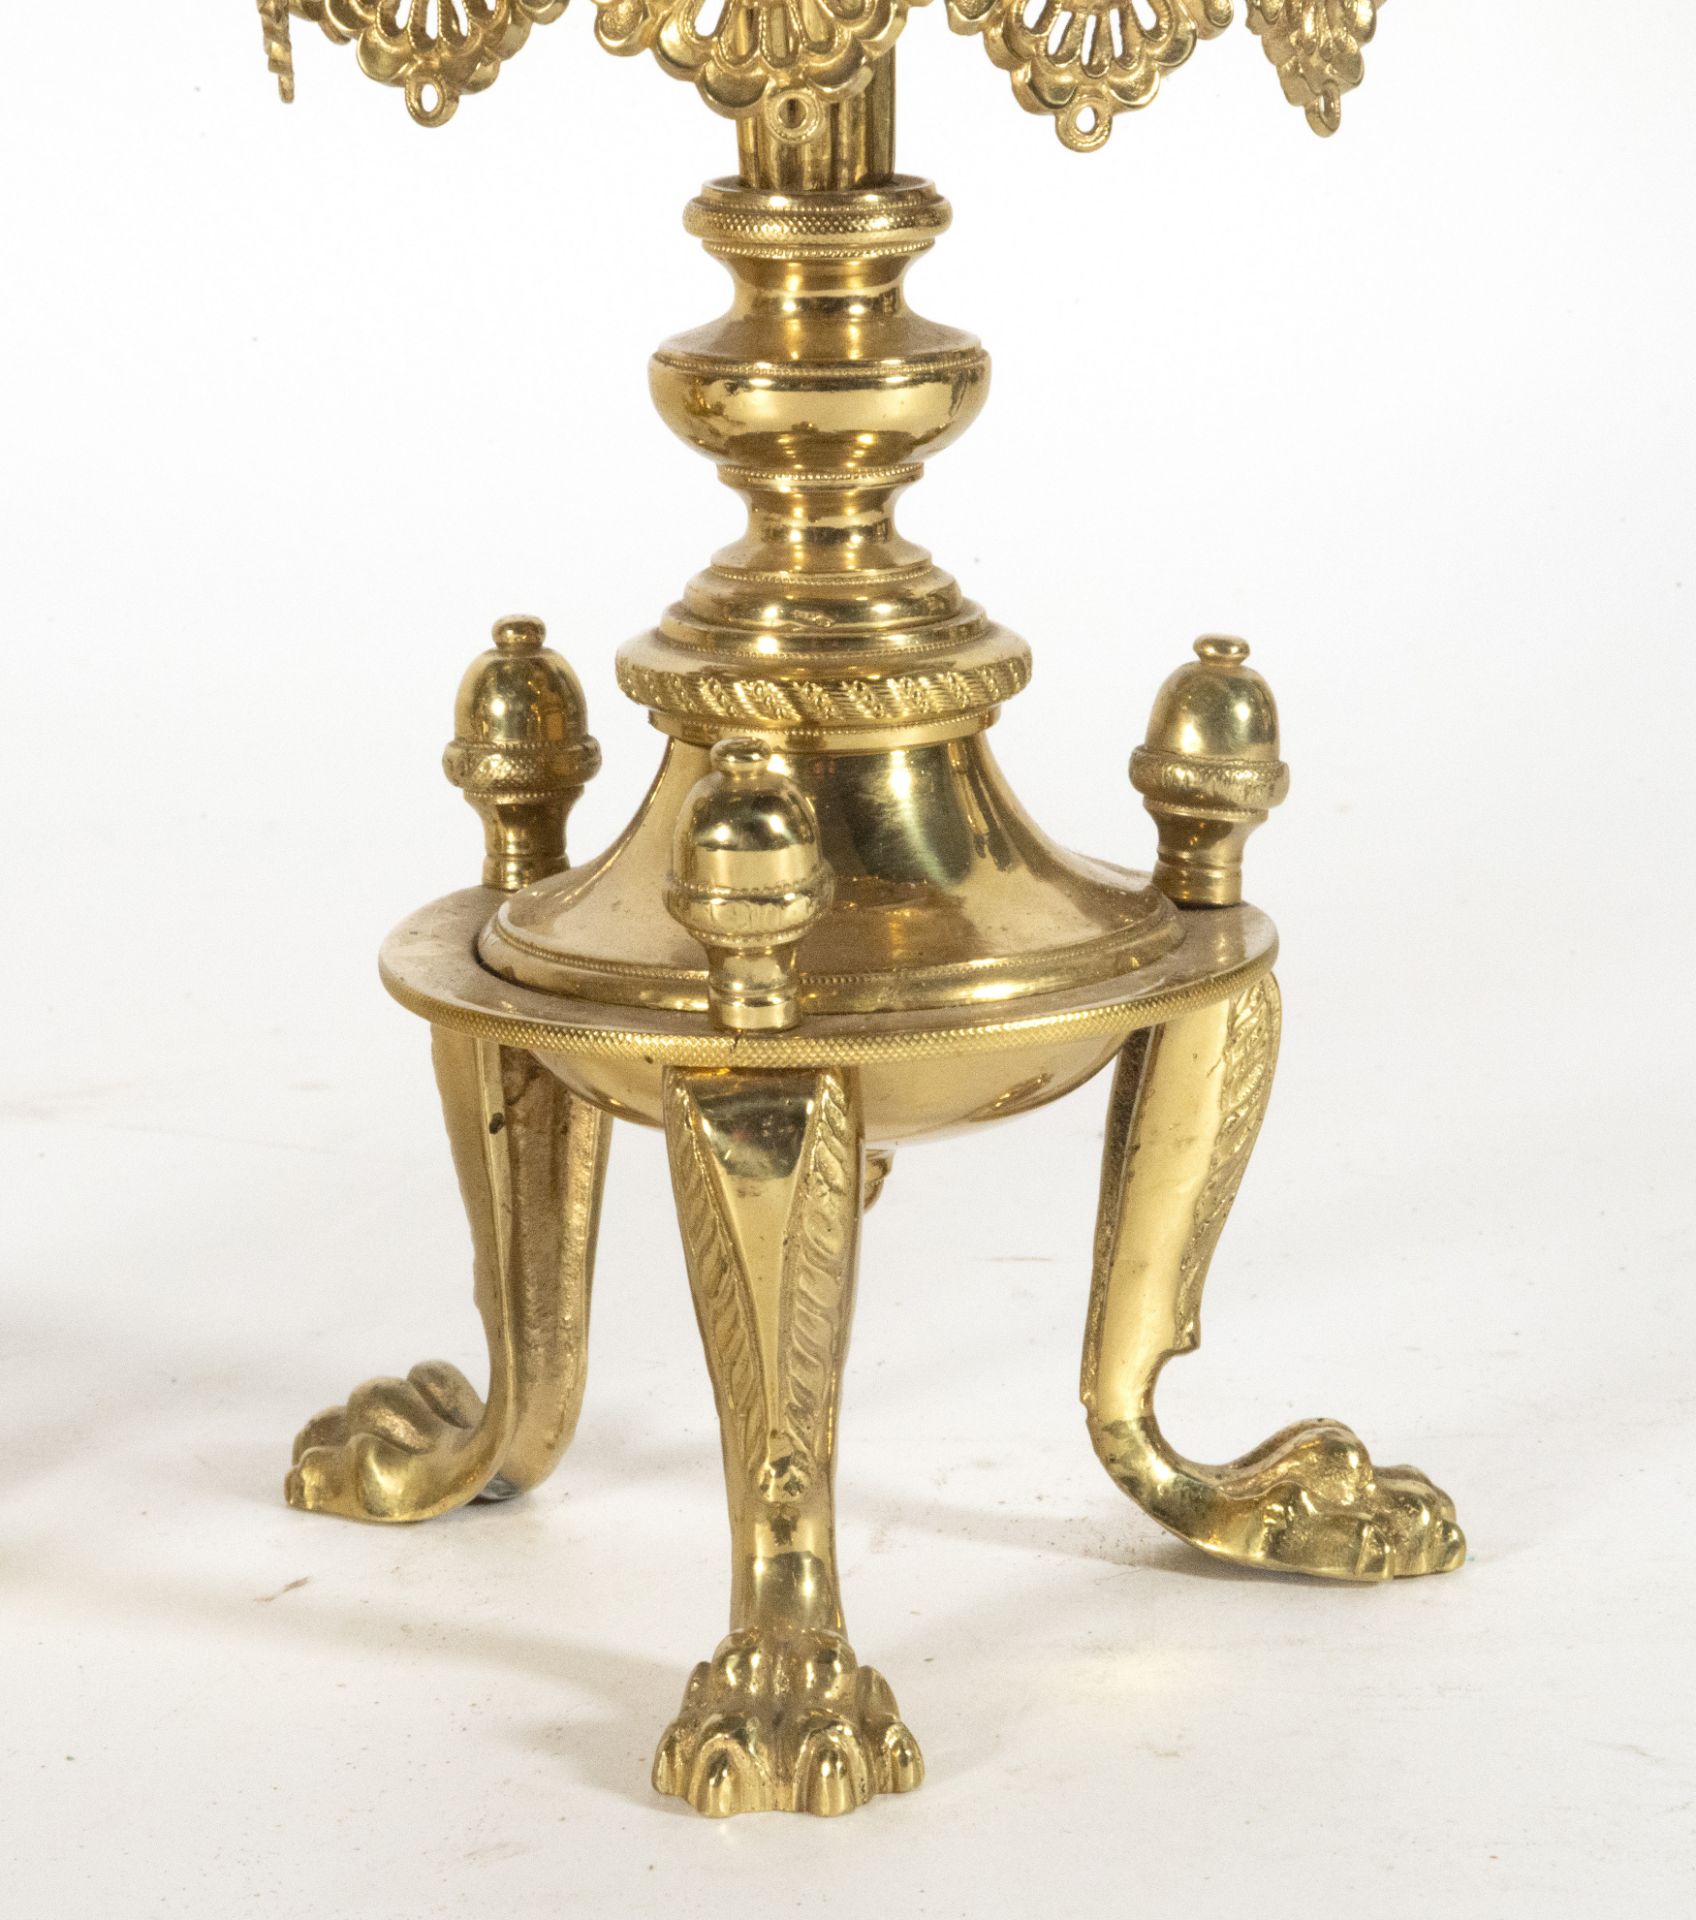 Pair of Victorian English rotating gilt bronze candelabras, 19th century - Image 3 of 3